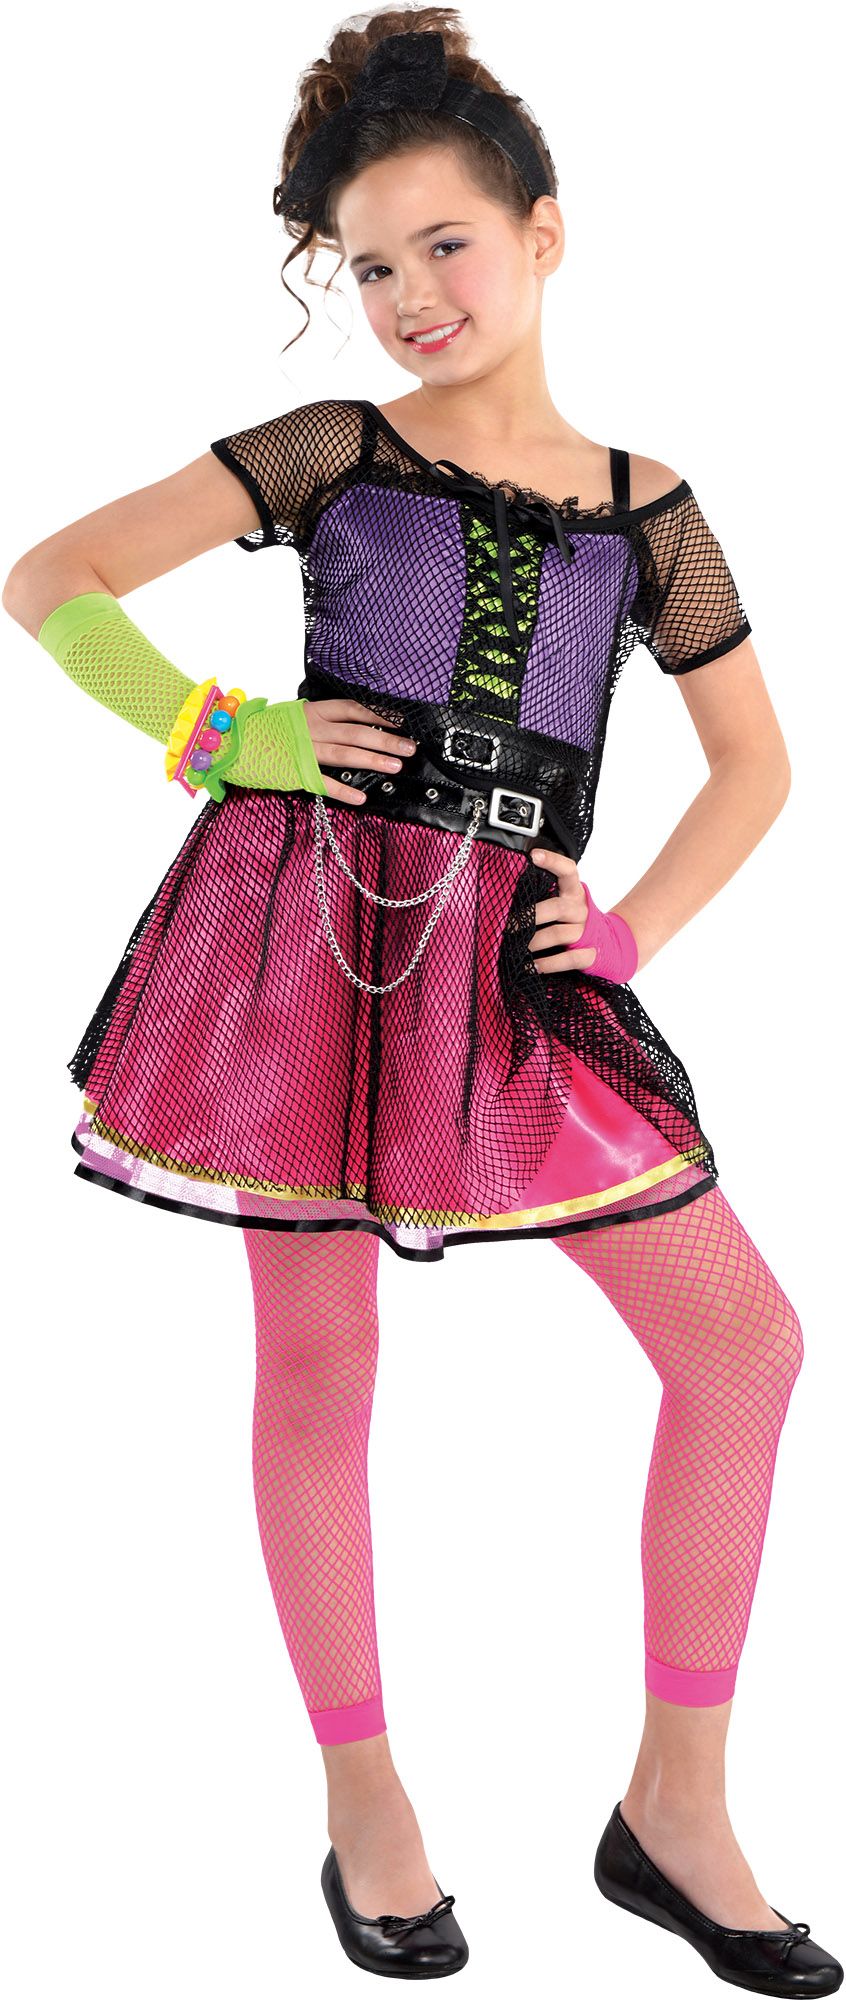 Create Your Own Girls' 80s Pop Star Costume Accessories ...